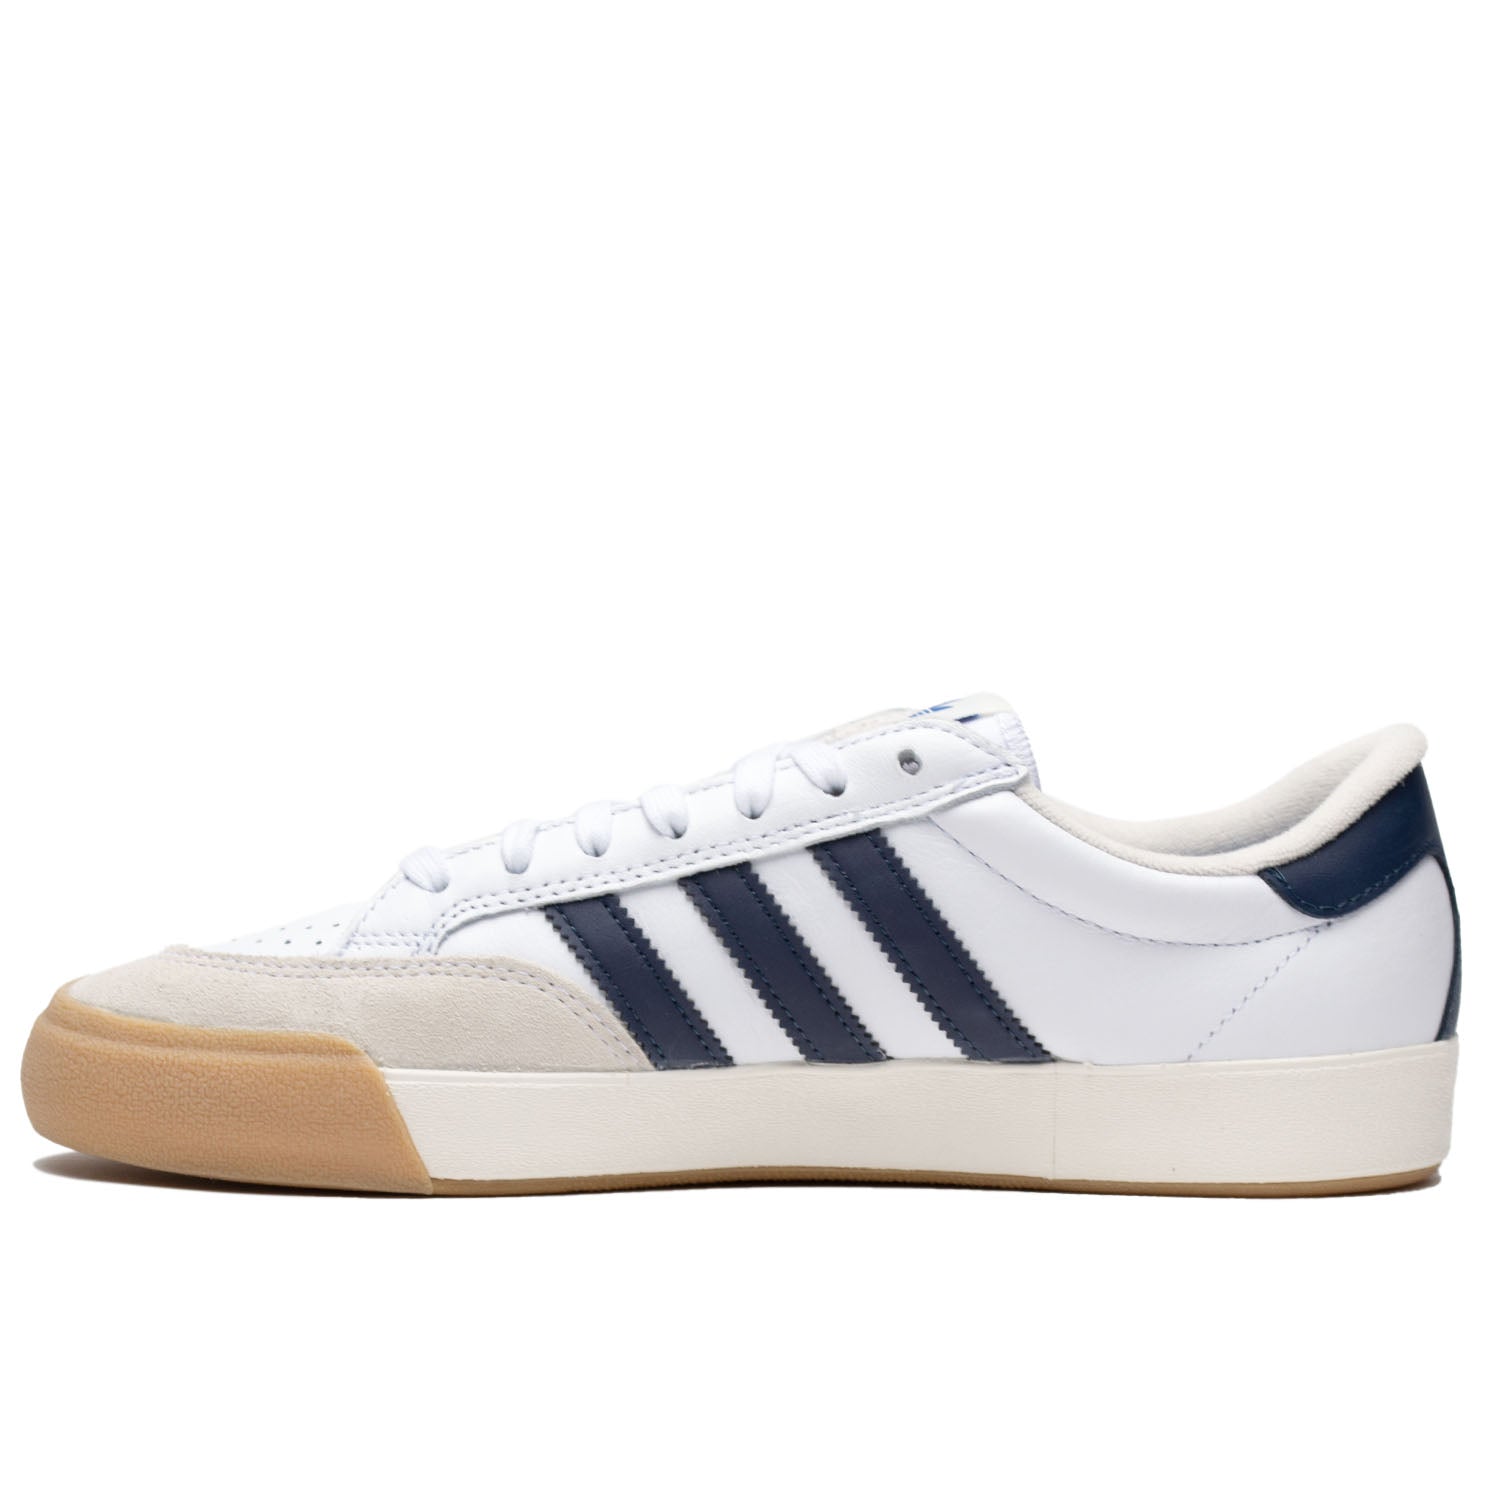 White leather Adias skateboarding shoe with navy leather detailing and cream colored toe cap with white and tan rubber.